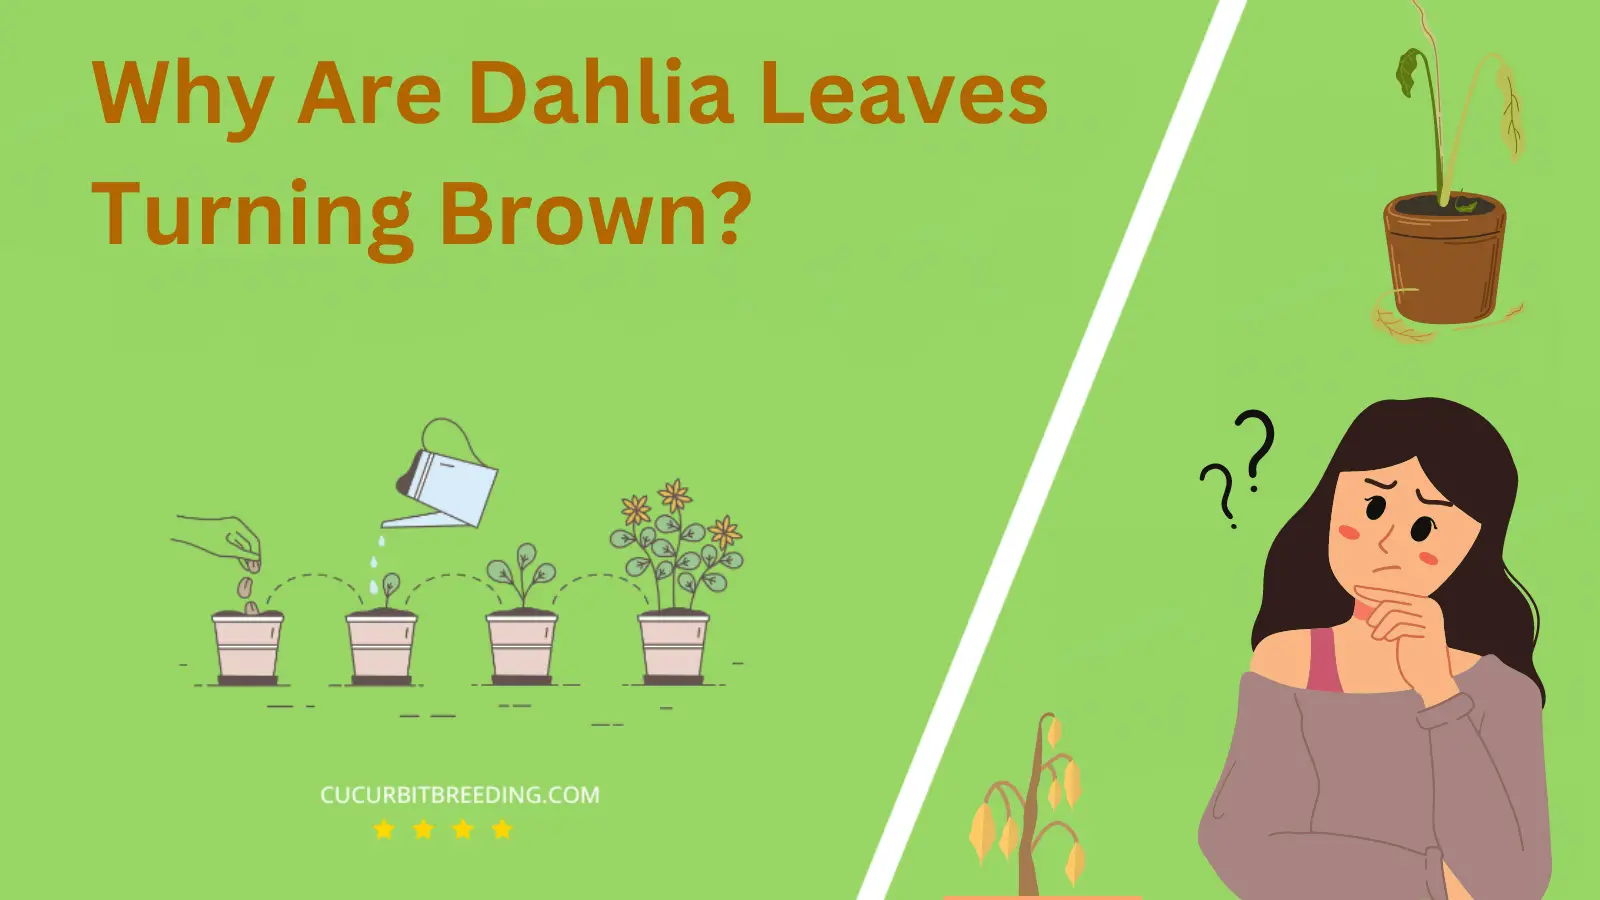 Why Are Dahlia Leaves Turning Brown